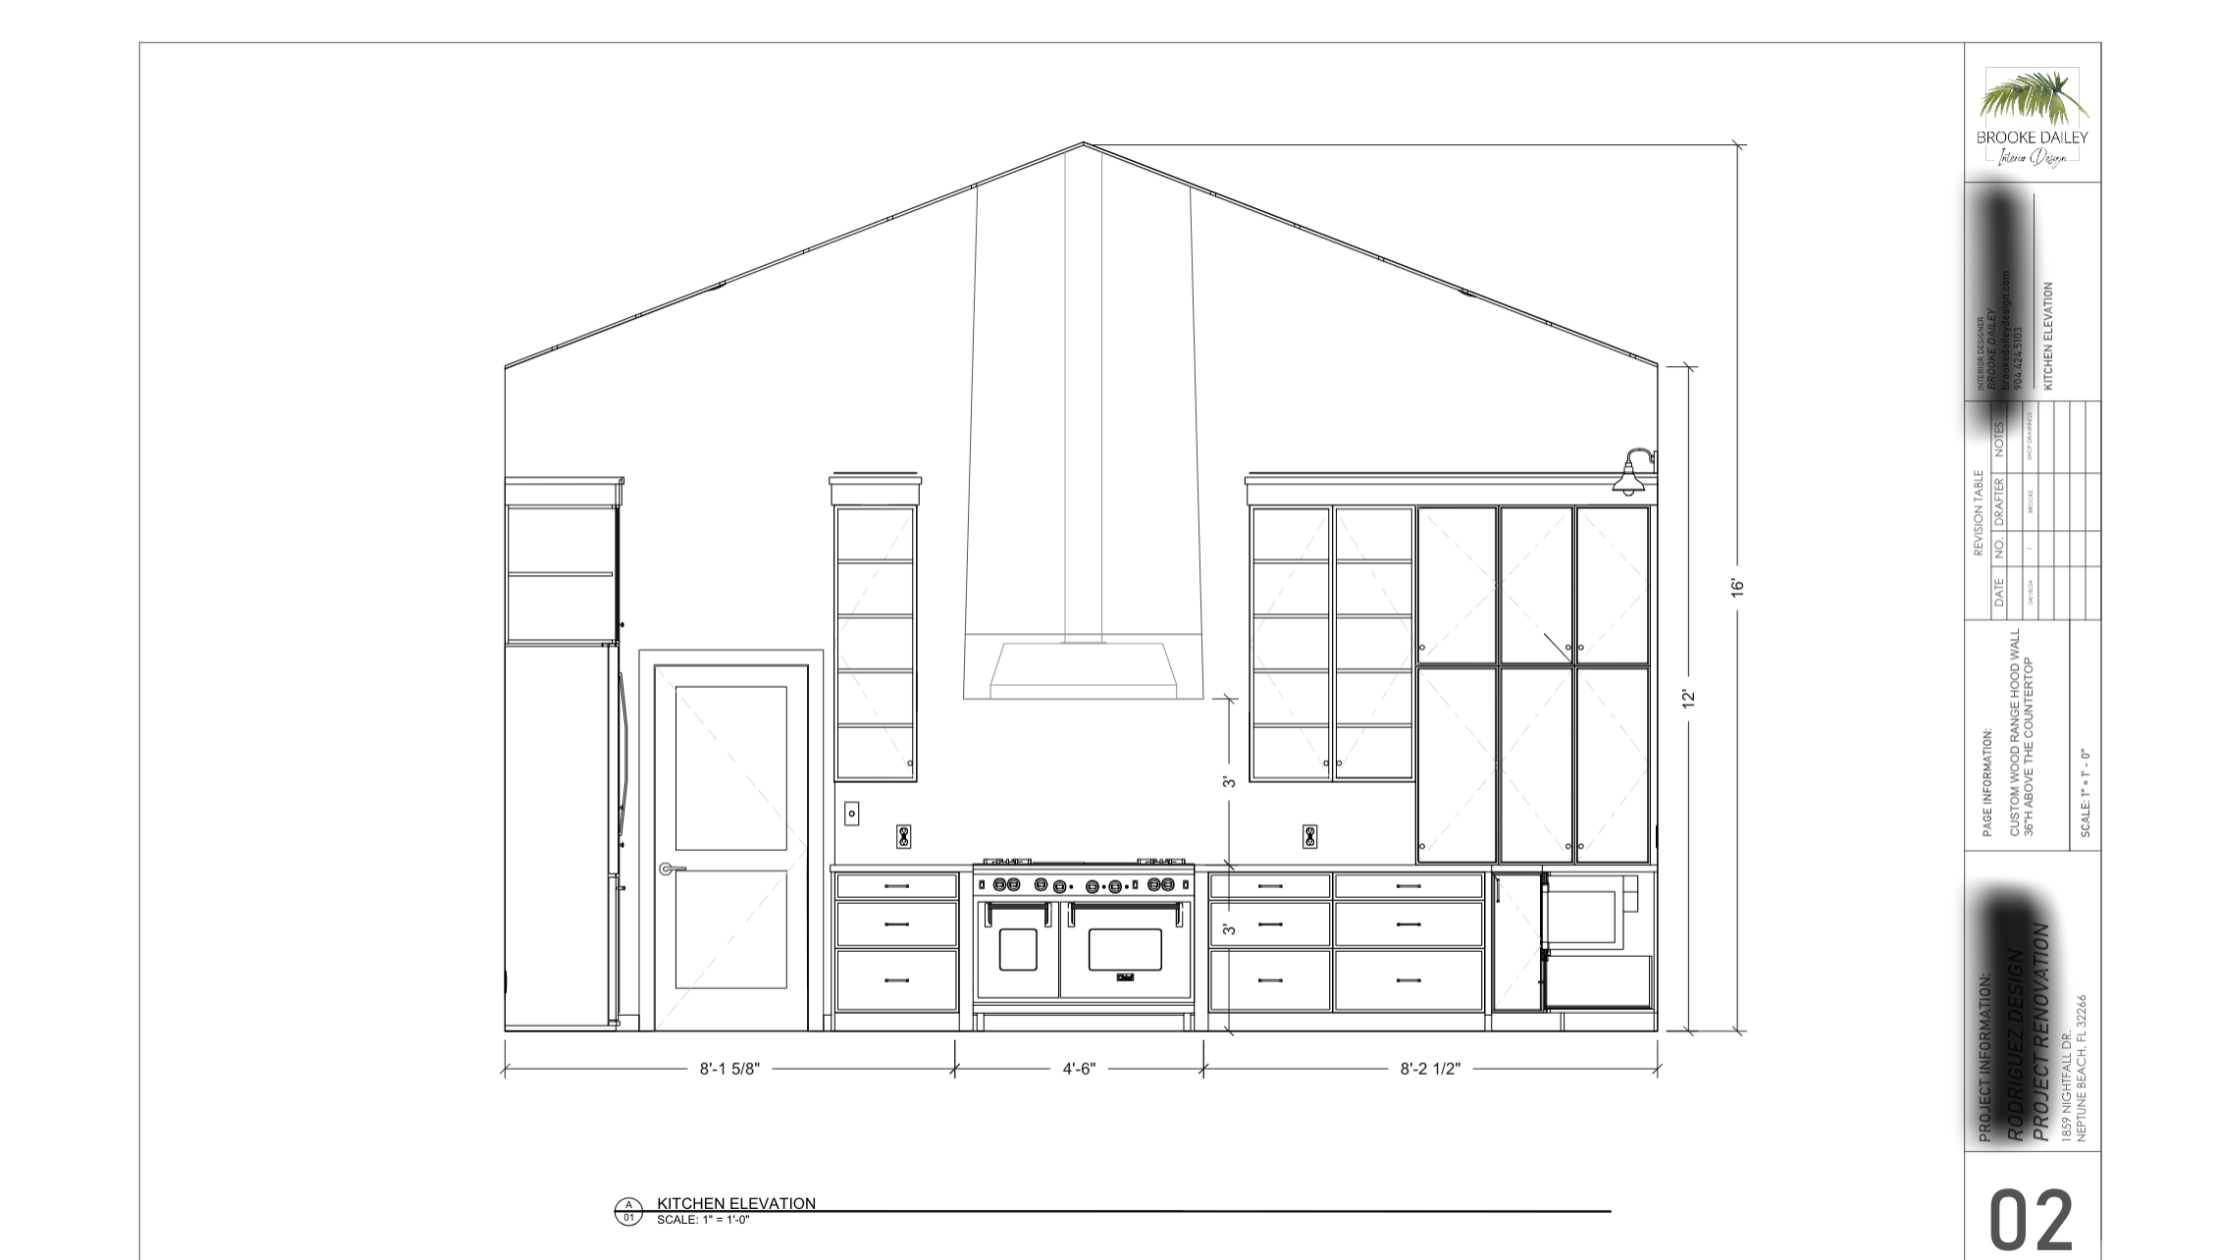 Outsourced shop drawing for a custom range hood. Shop drawing by 4Dbiz Virtual Design Assistant Team. Kitchen elevation with custom range hood. 